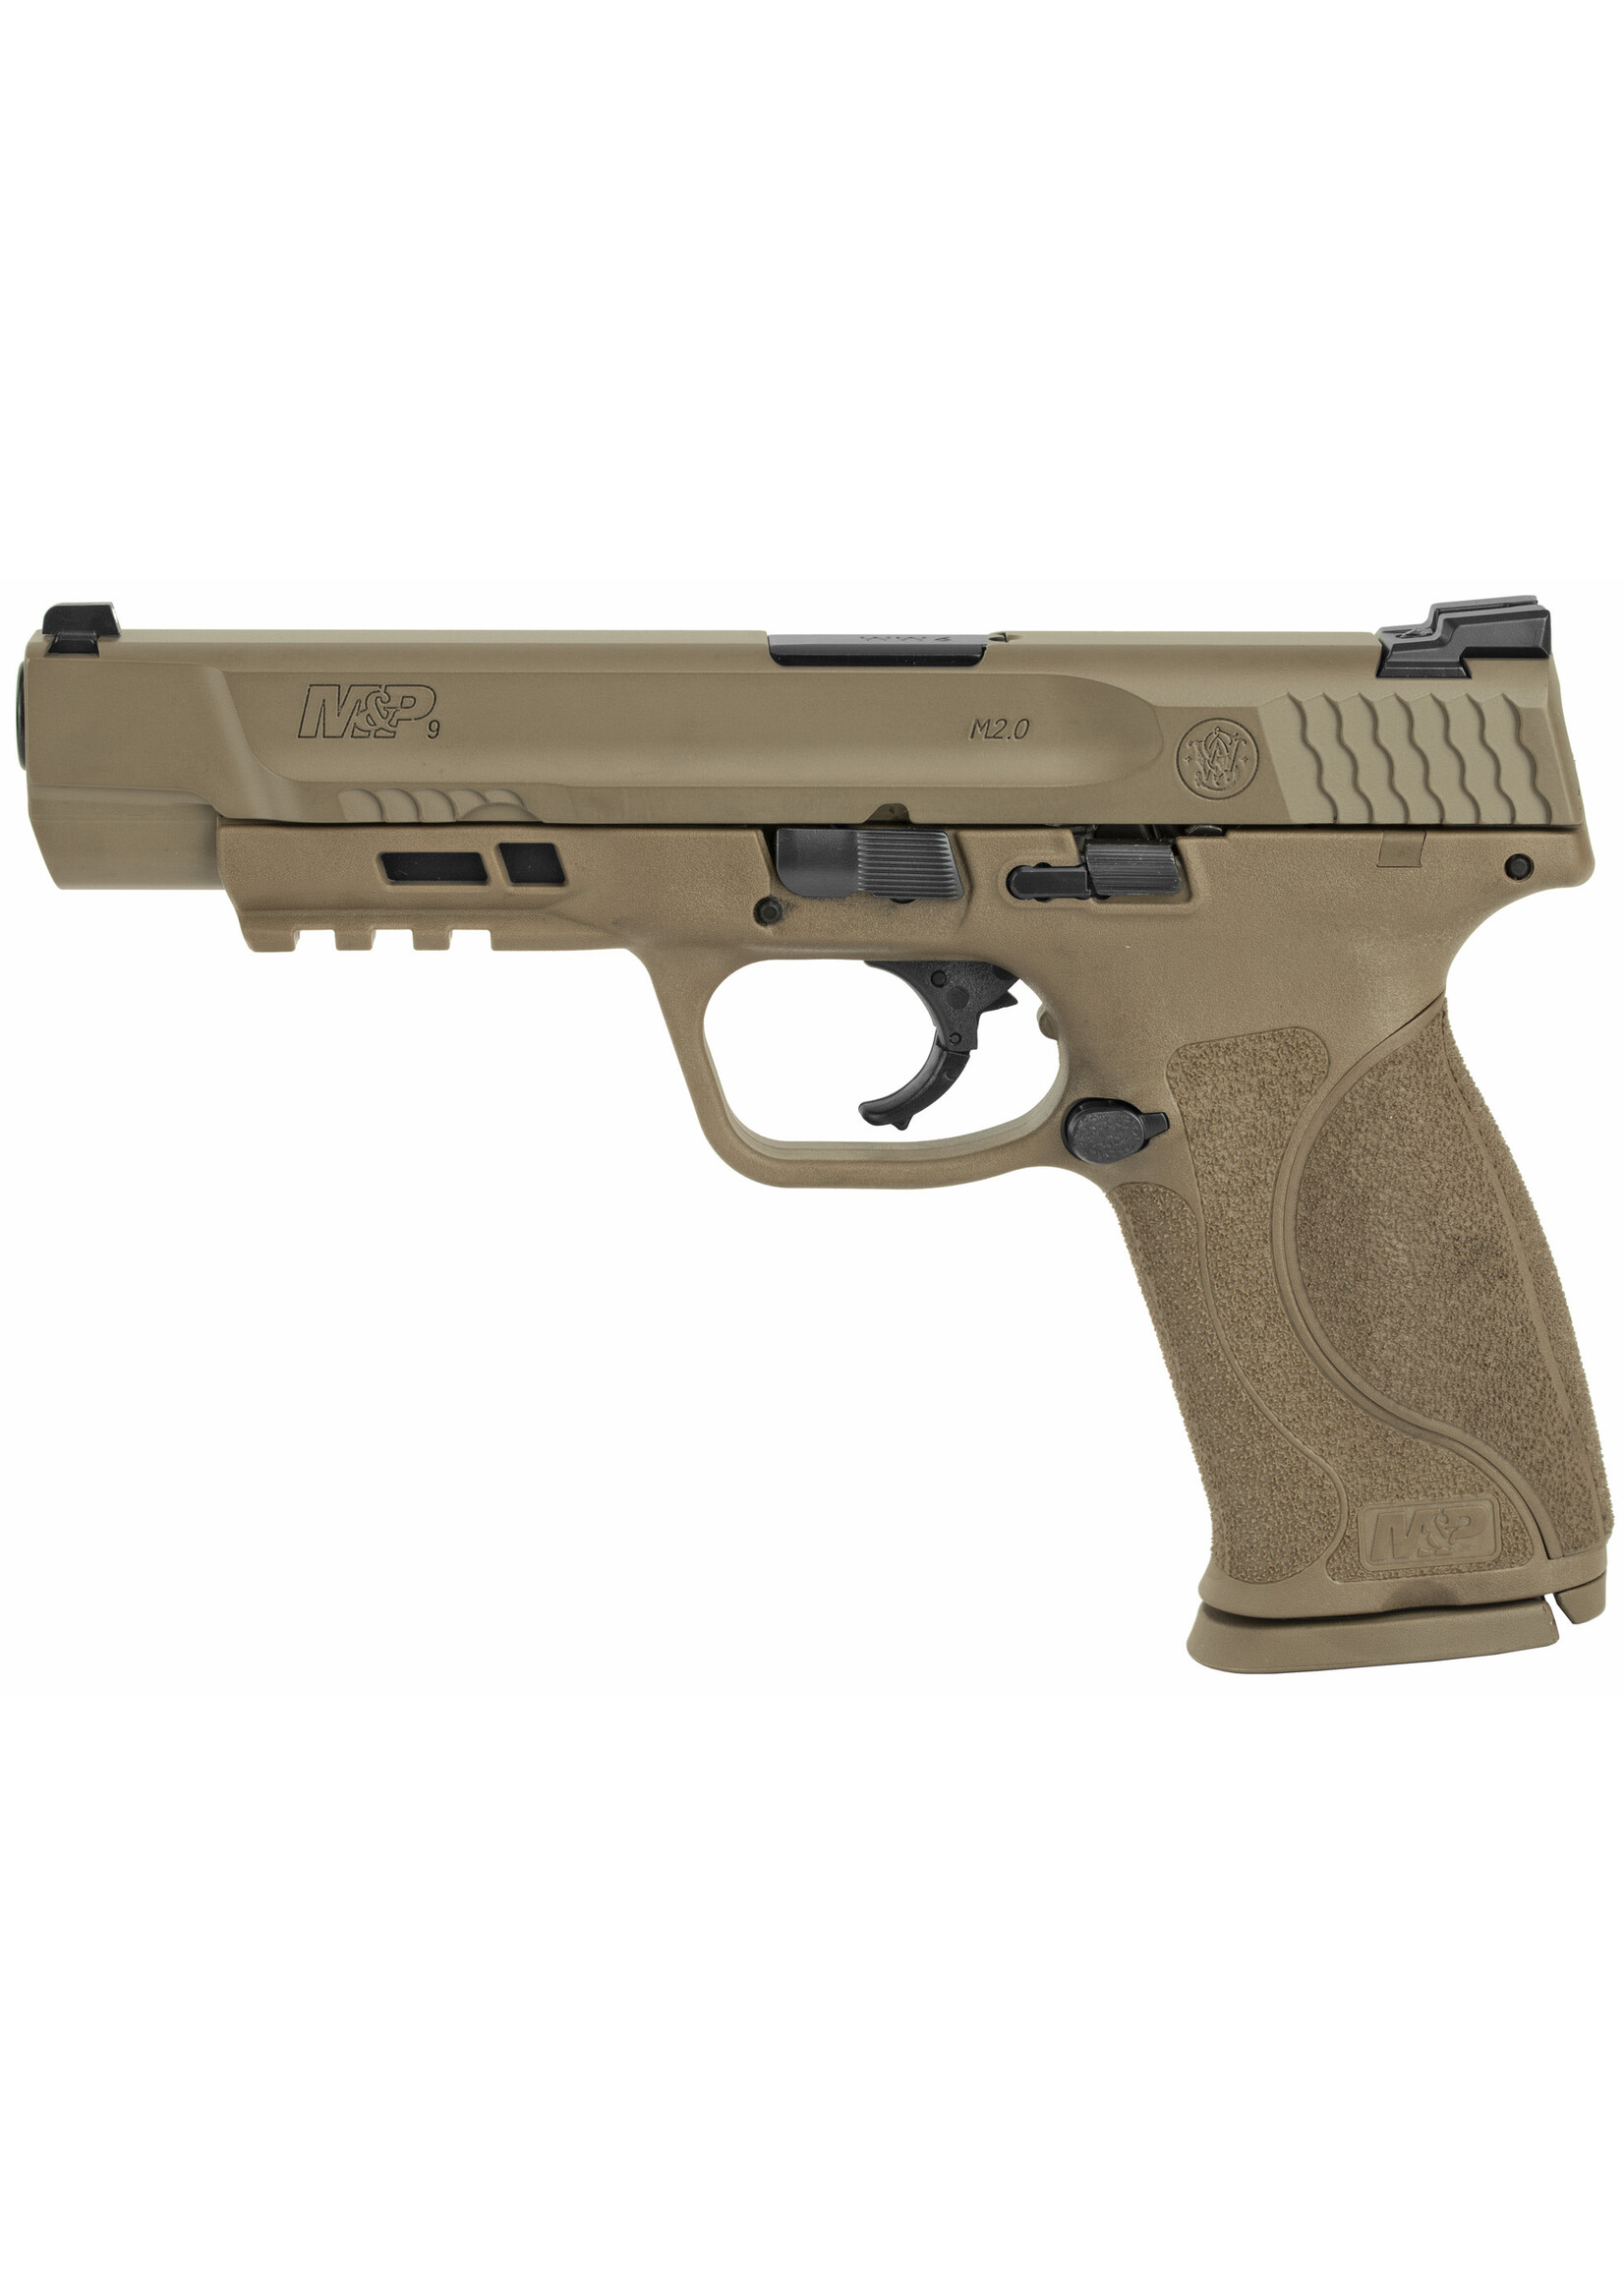 Smith and Wesson (S&W) Smith & Wesson 11989 M&P M2.0 9mm Luger 5" Barrel 17+1, Flat Dark Earth Polymer Frame With Picatinny Acc. Rail, FDE Armornite Stainless Steel Slide, No Manual Safety